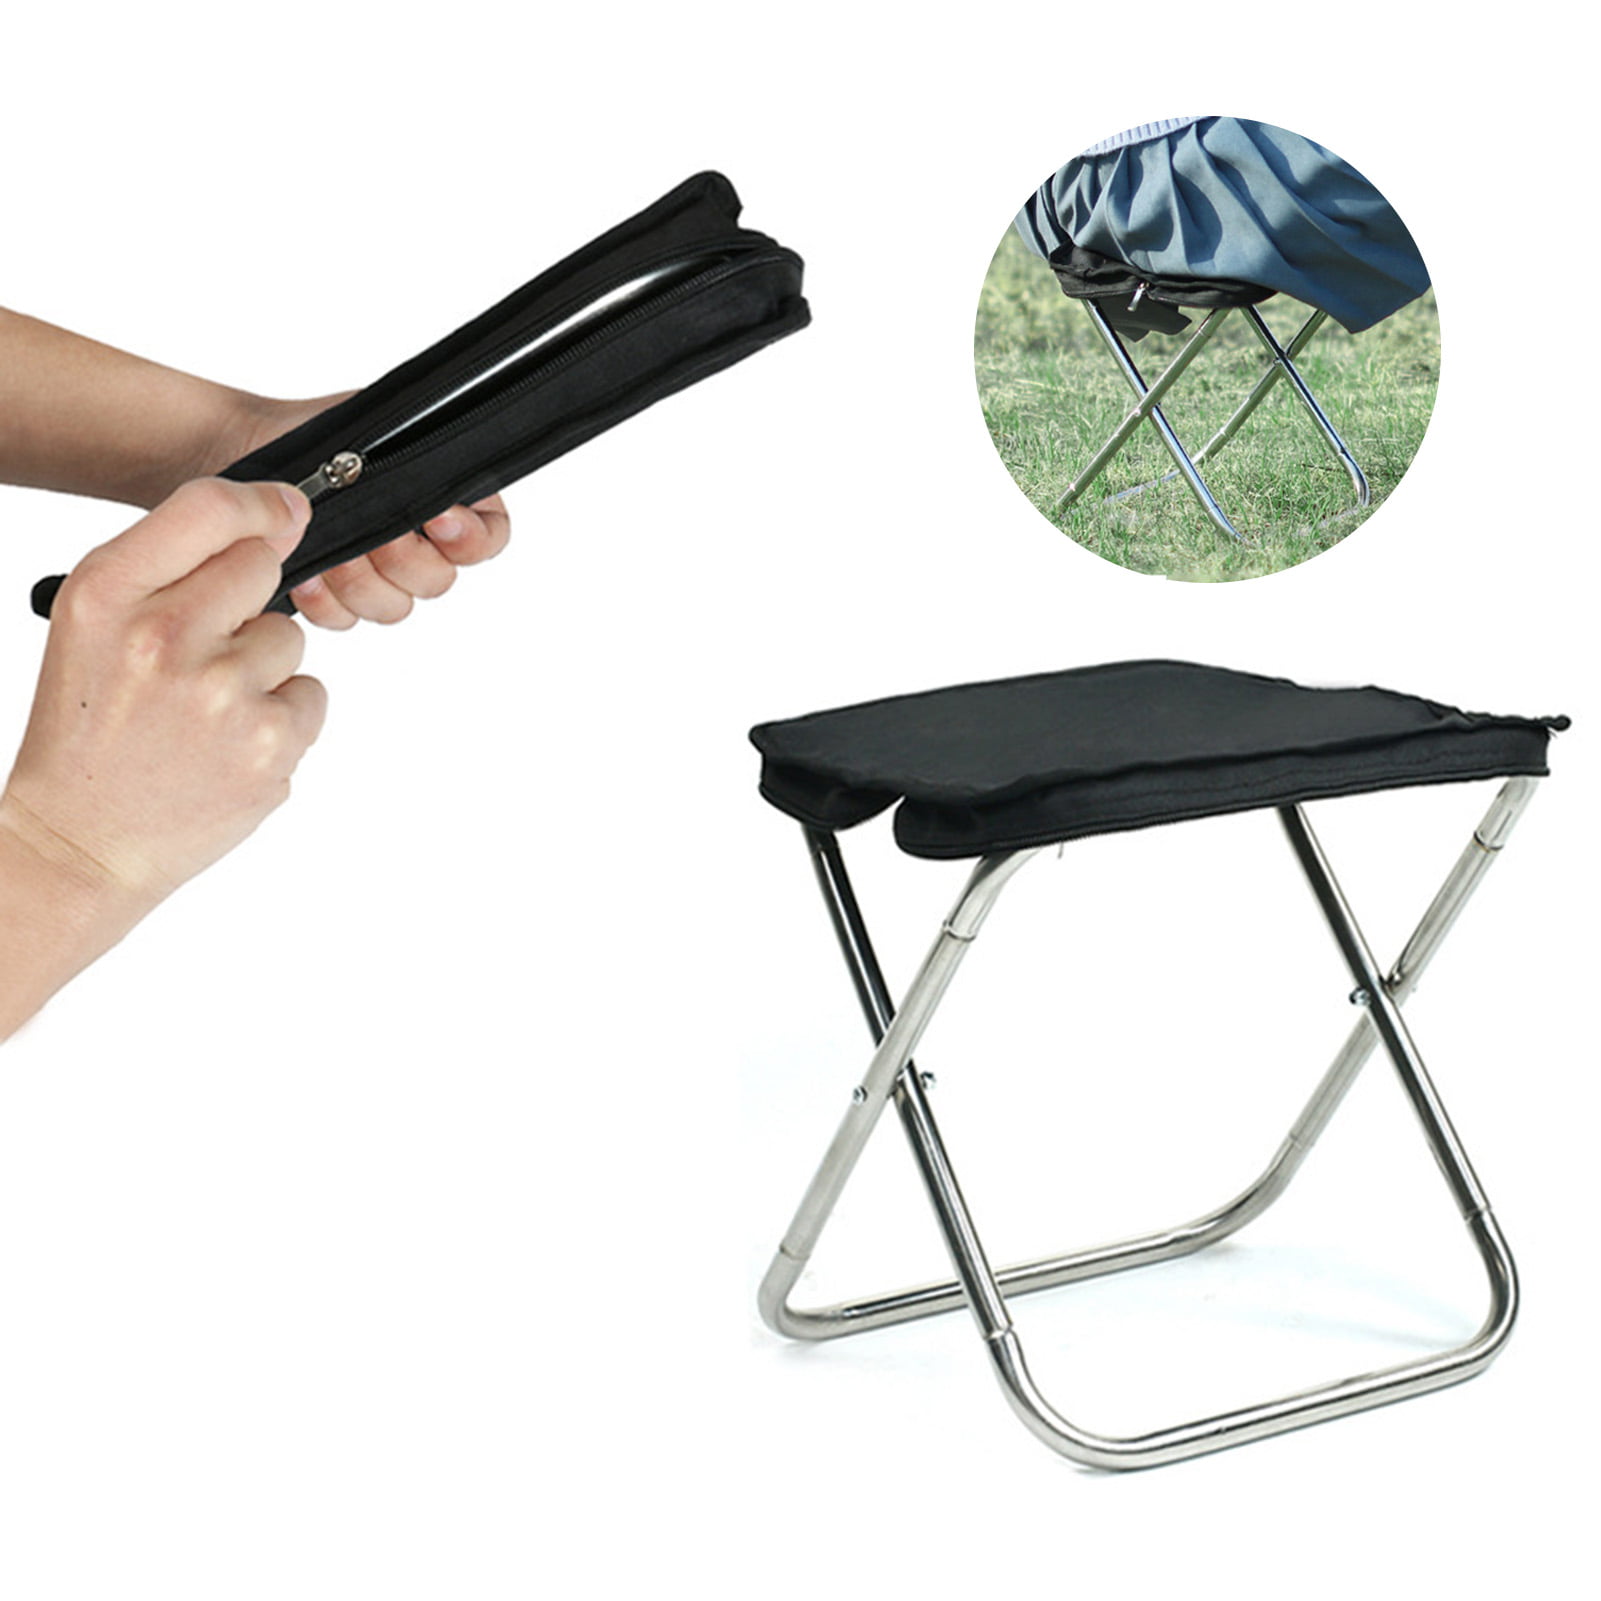 Portable Aluminum Folding Chair Stool Seat For Outdoor Fishing Garden Picnic 